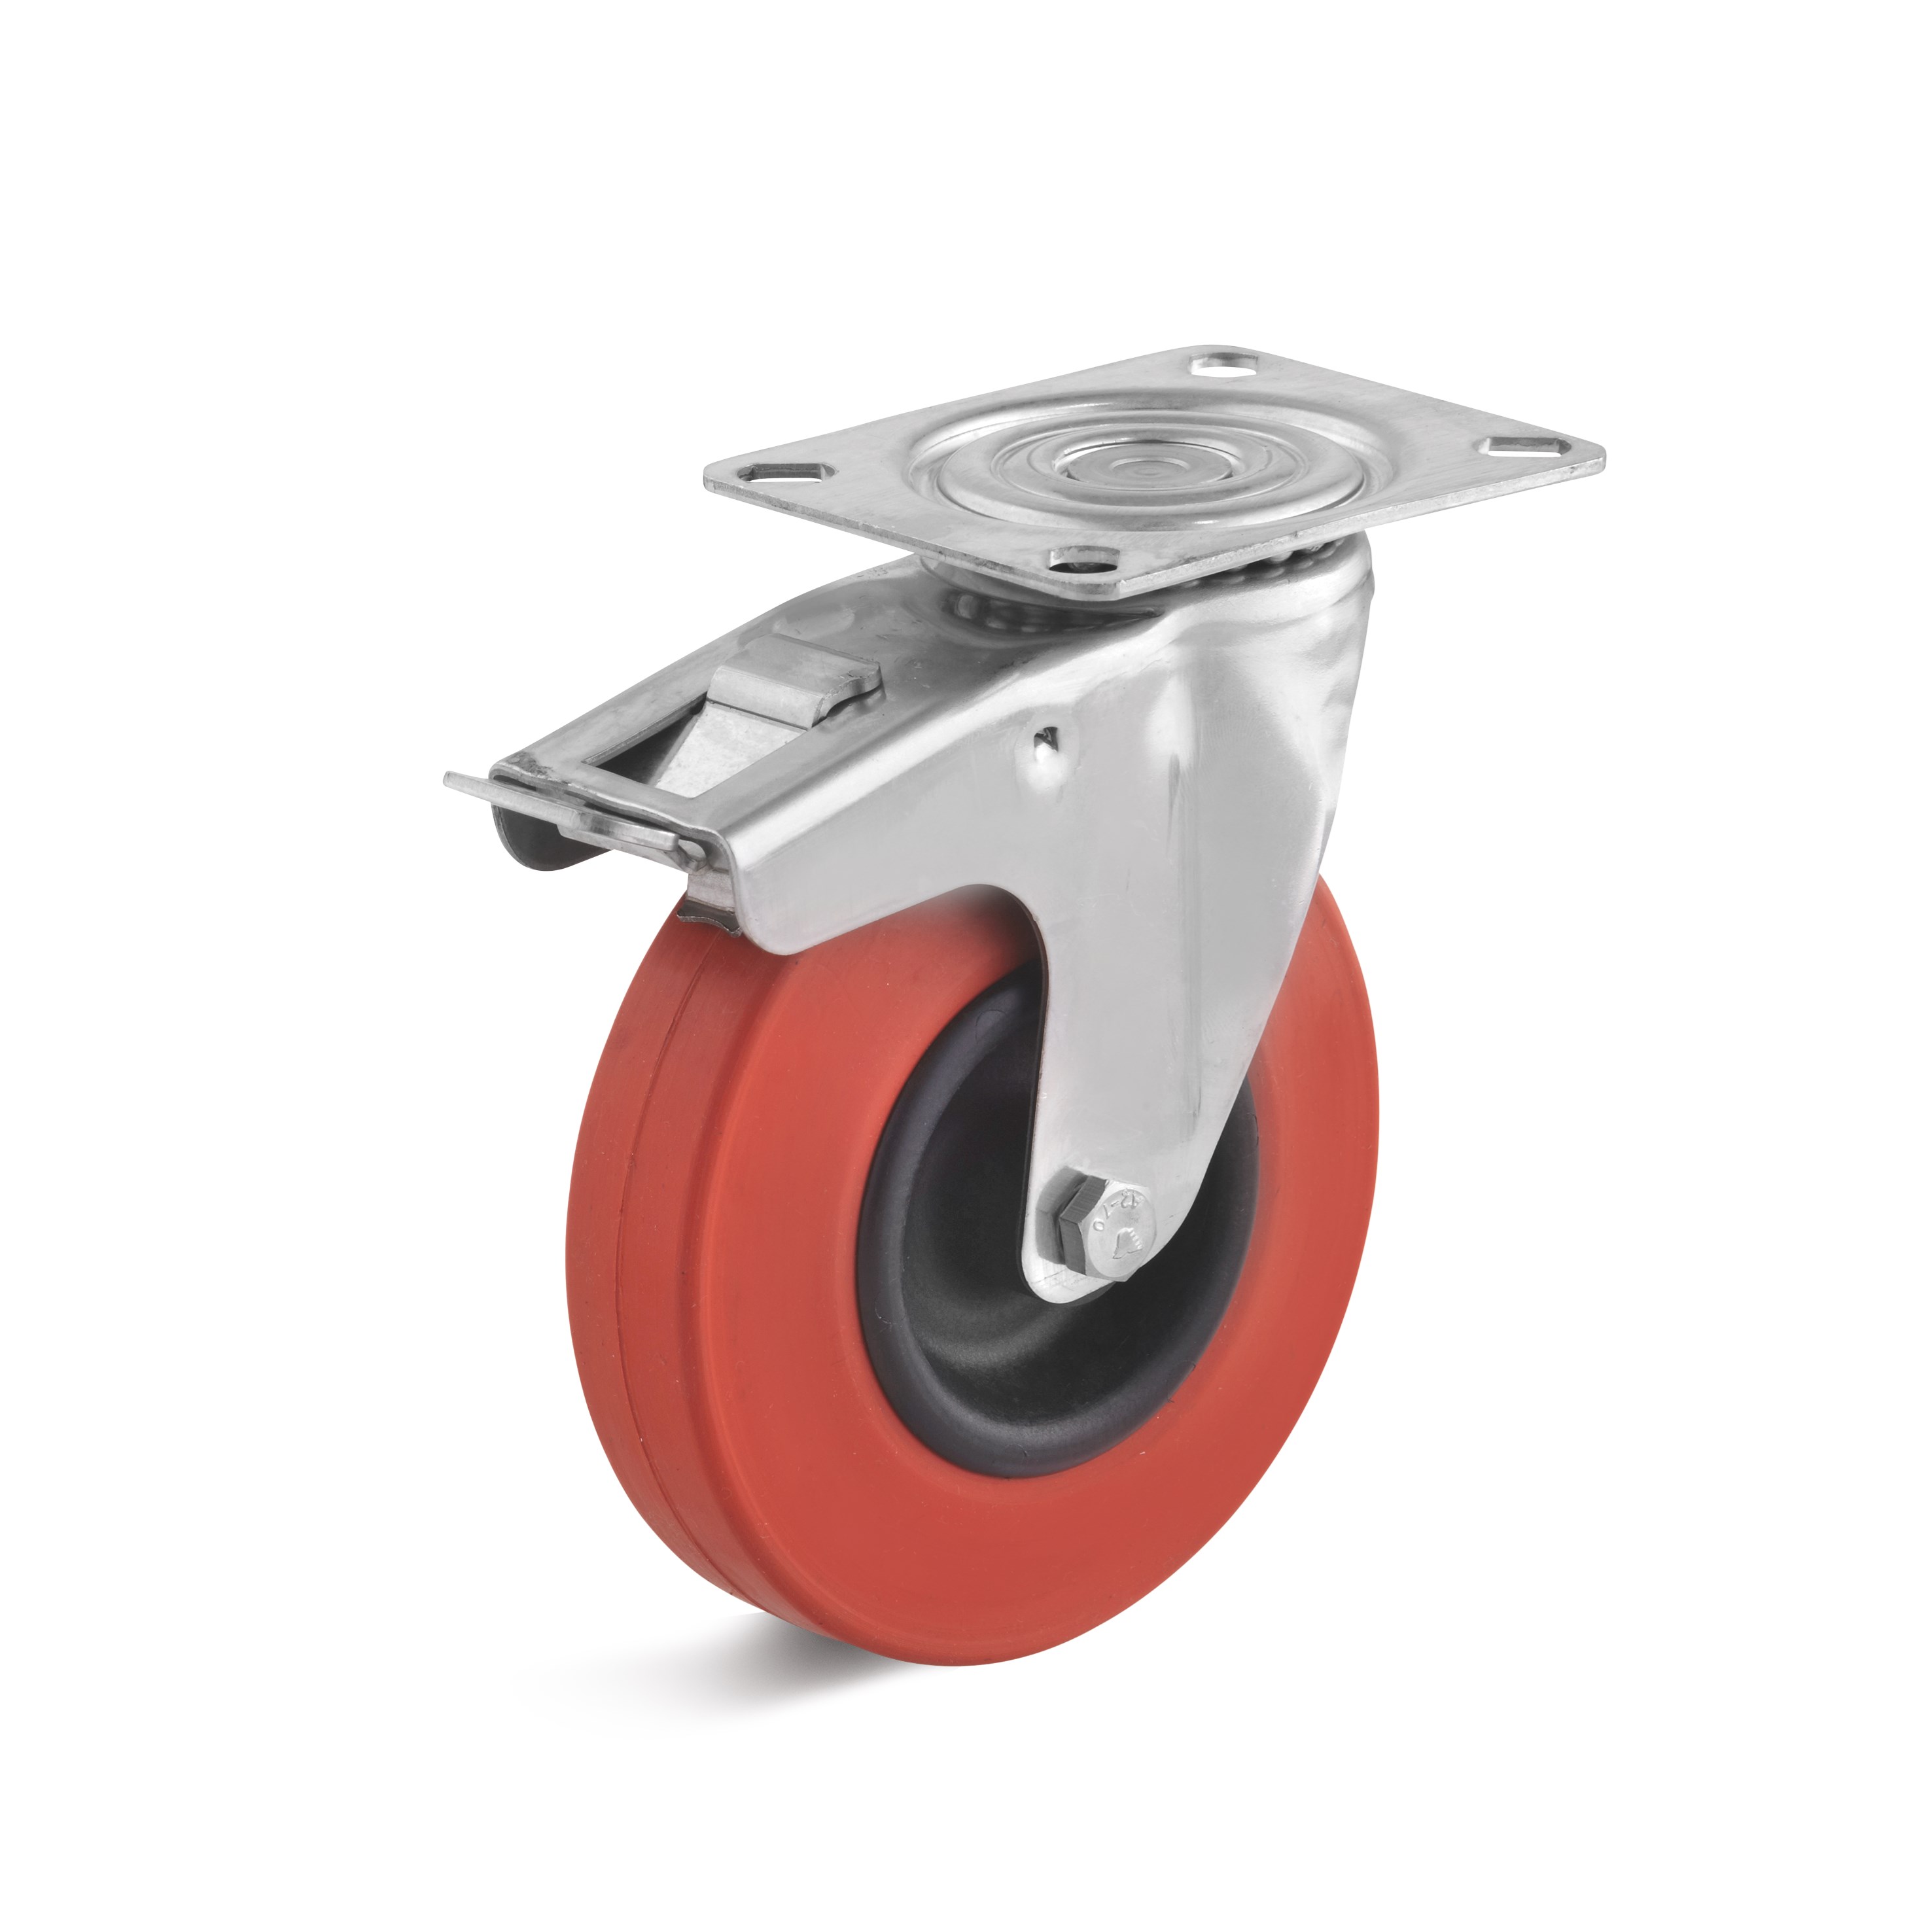 Stainless steel swivel castor with double stop and heat resistant rubber wheel